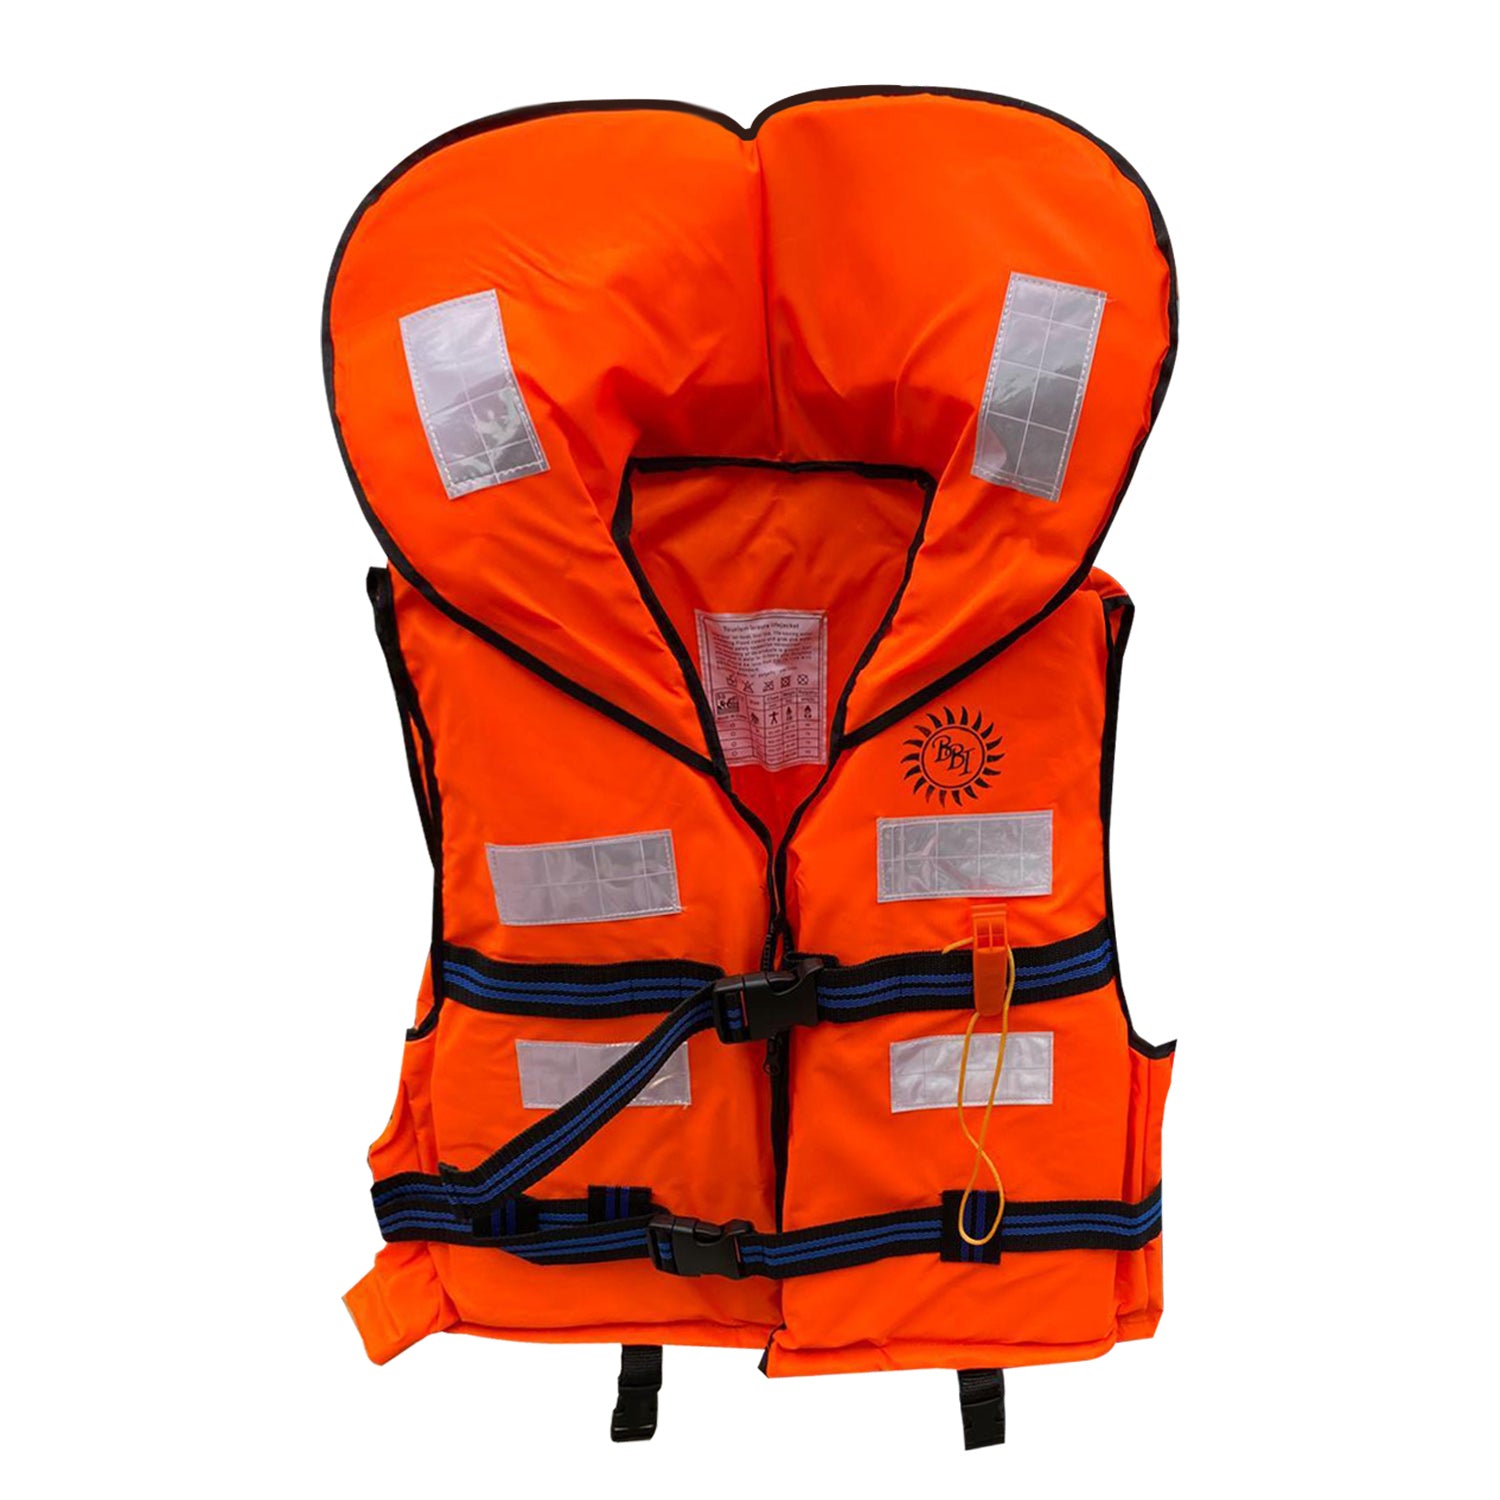 Buy Life Jacket for Swimming, Boating, Floating Online at Best Prices –  Robustt